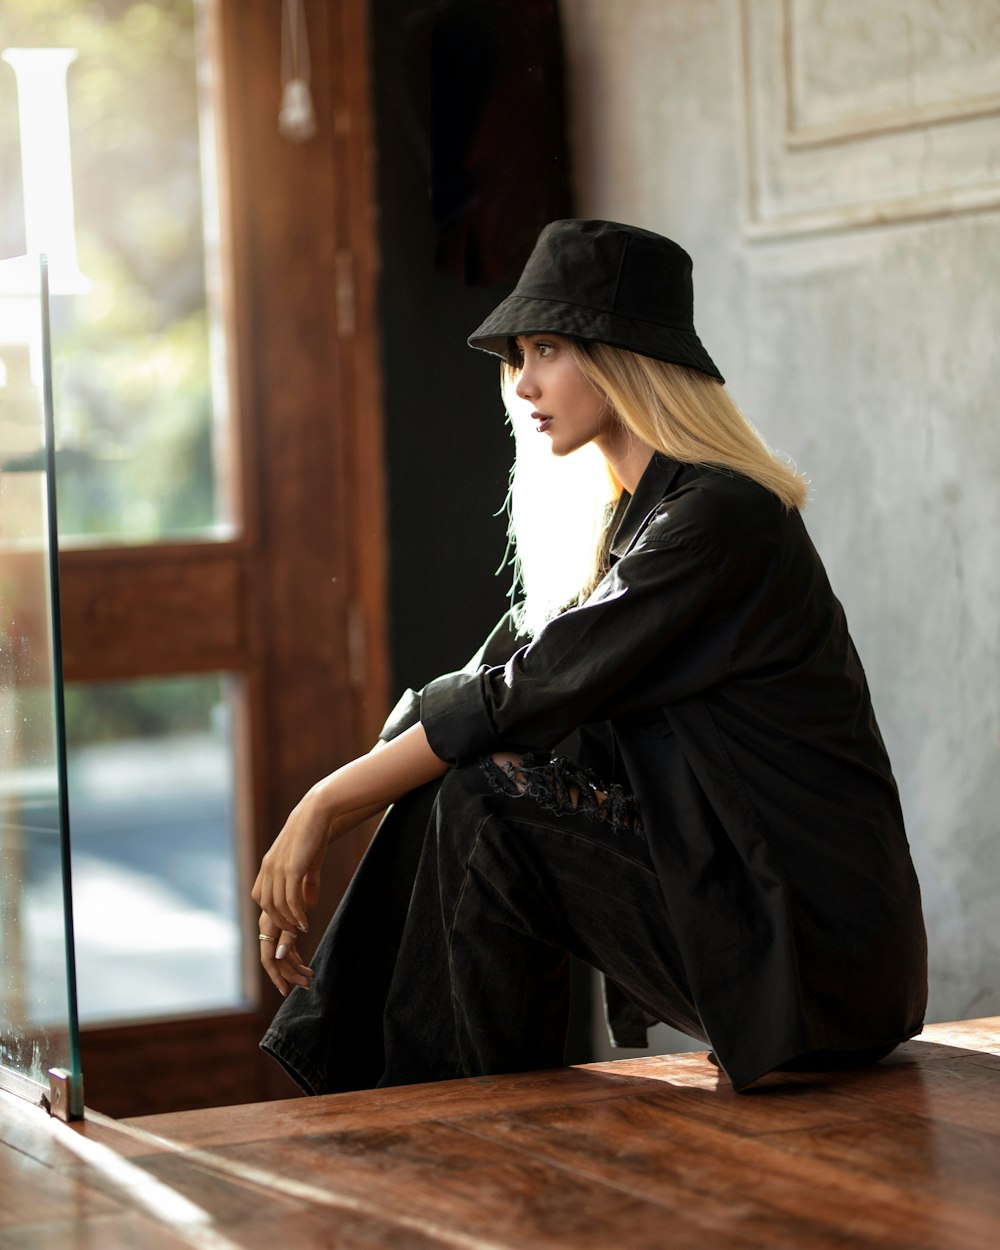 woman in black long sleeve dress and black hat sitting on brown wooden bench